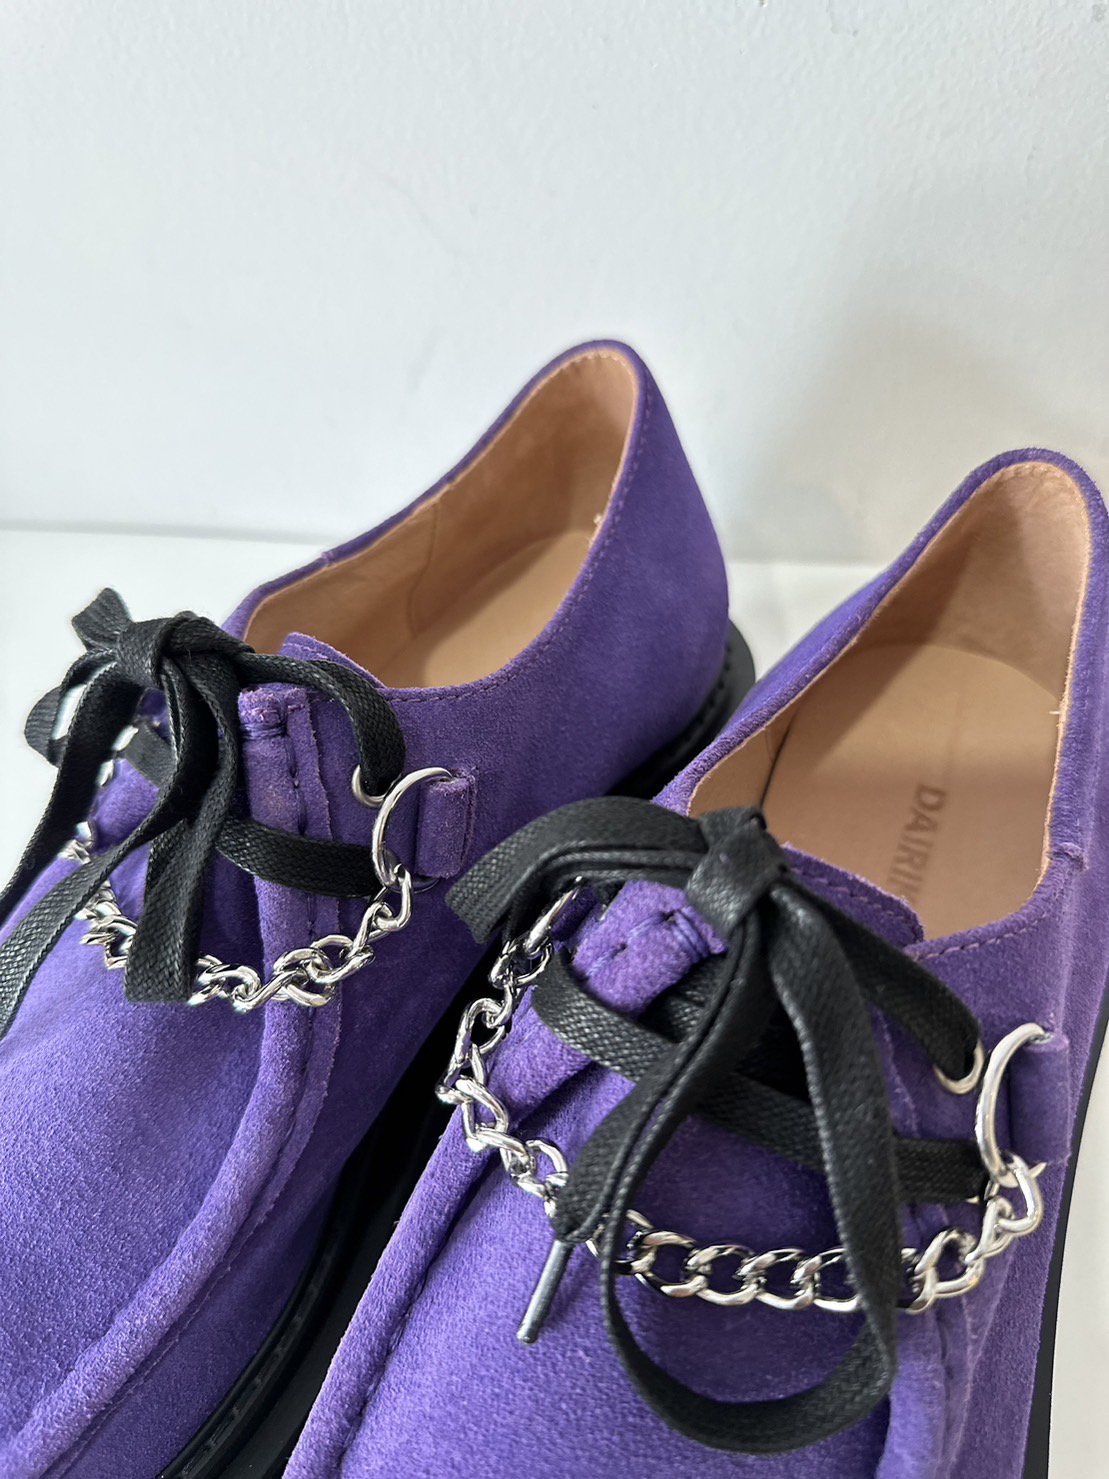 DAIRIKU<br />Suede Derby Shoes / Purple<img class='new_mark_img2' src='https://img.shop-pro.jp/img/new/icons14.gif' style='border:none;display:inline;margin:0px;padding:0px;width:auto;' />